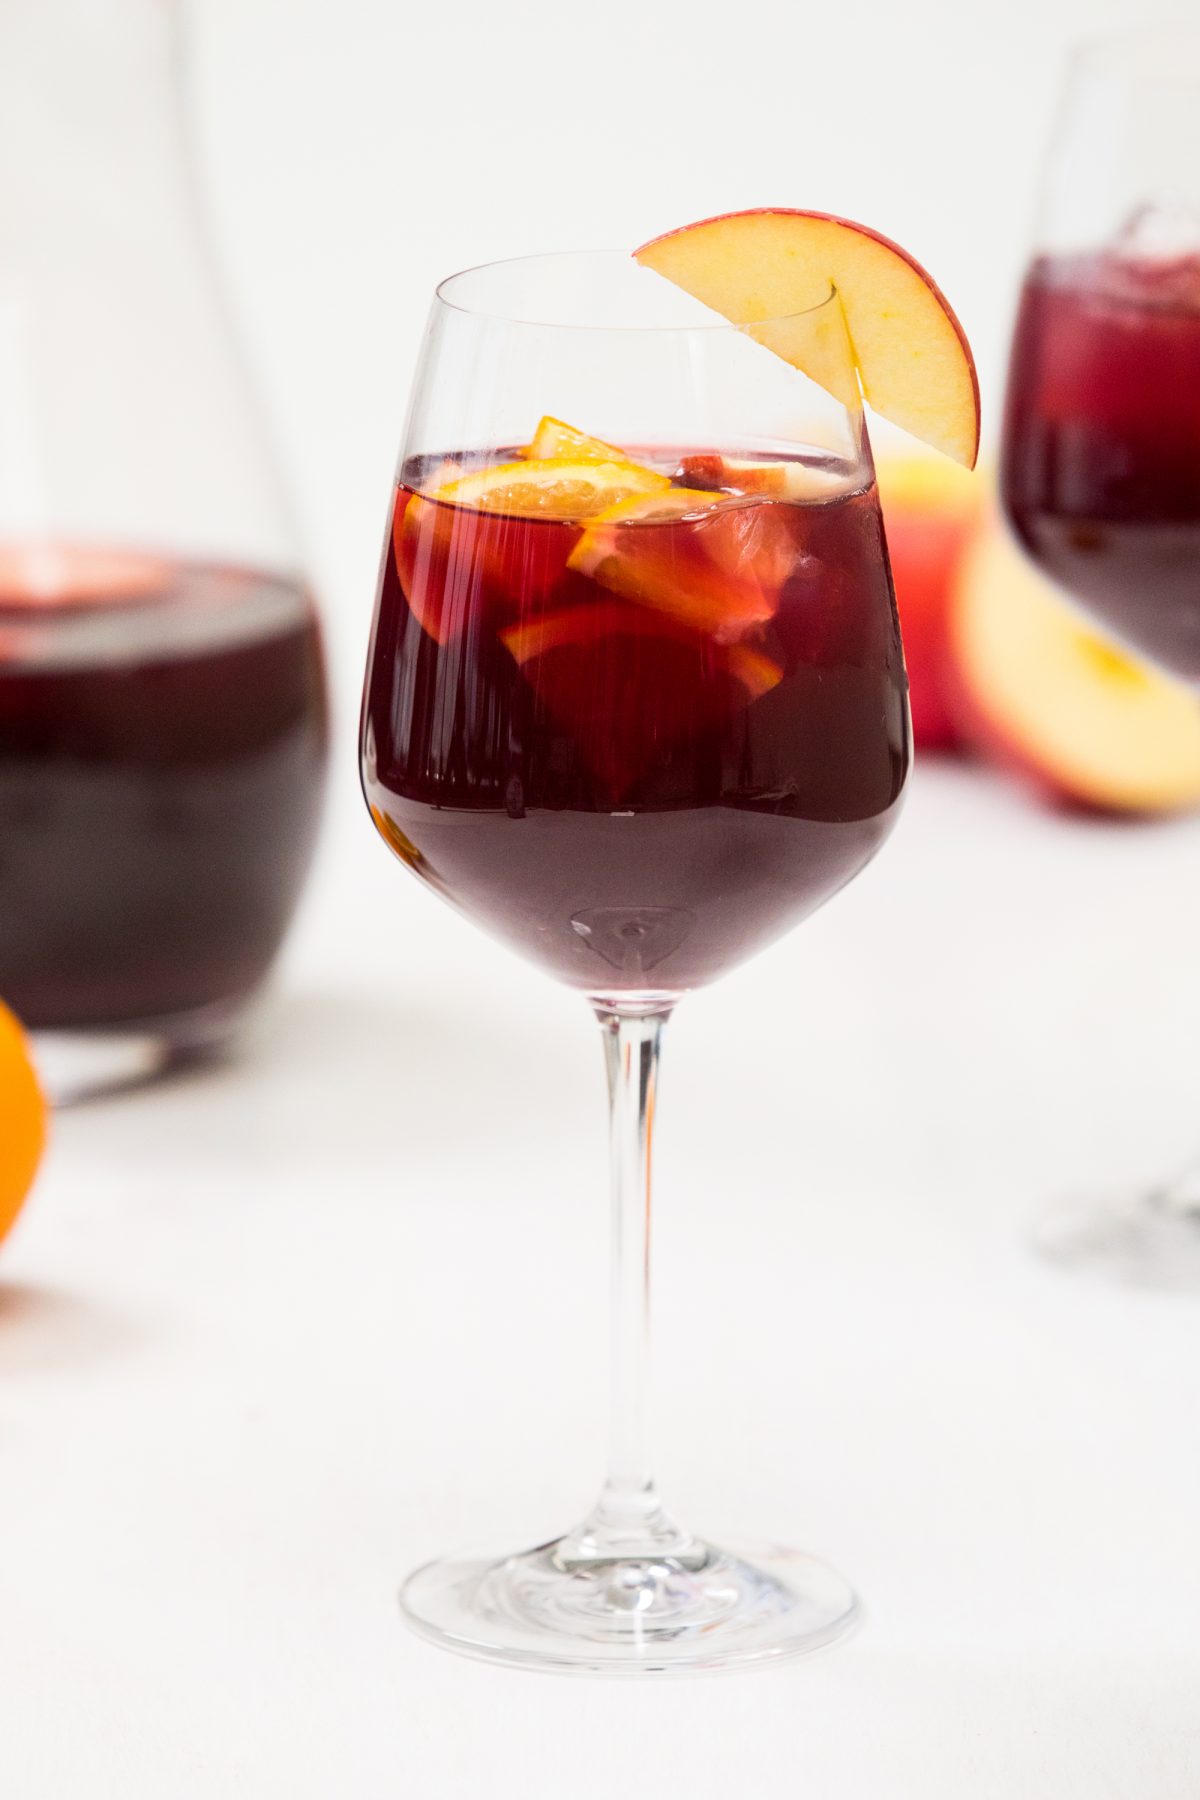 Glasses of Spiced sangria